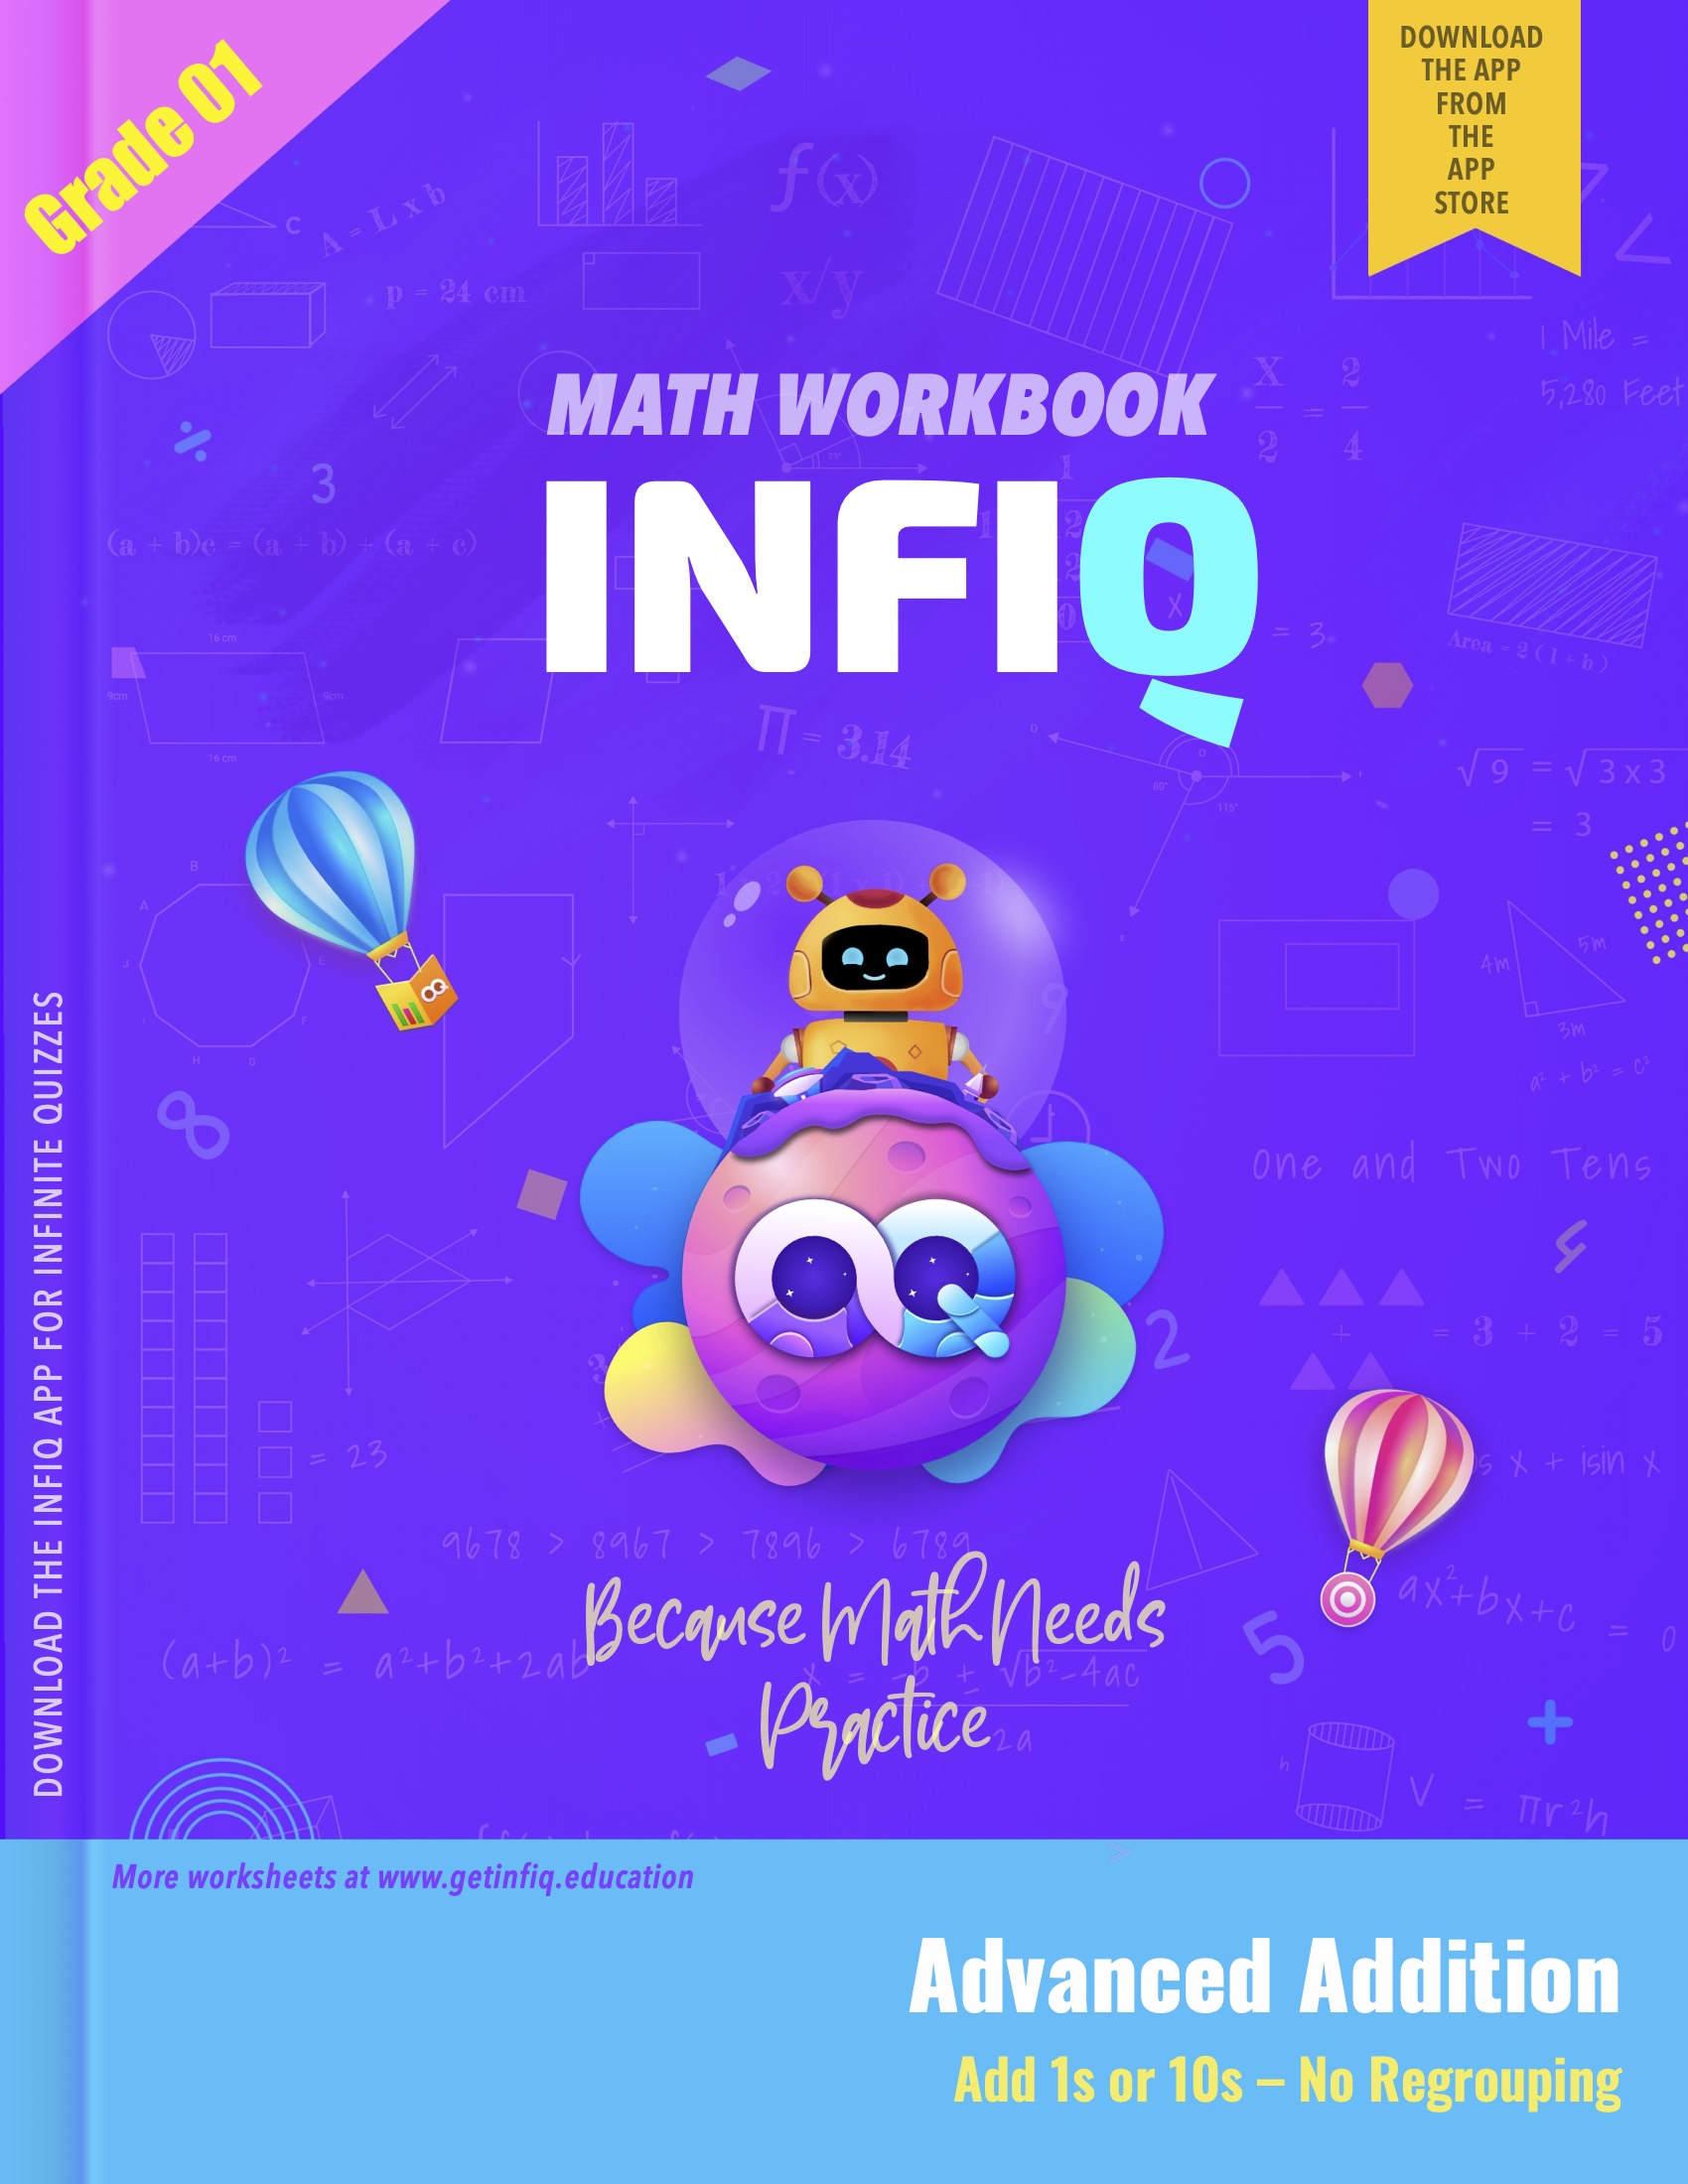 Grade 1 - Add 1s or 10s – No Regrouping Workbook